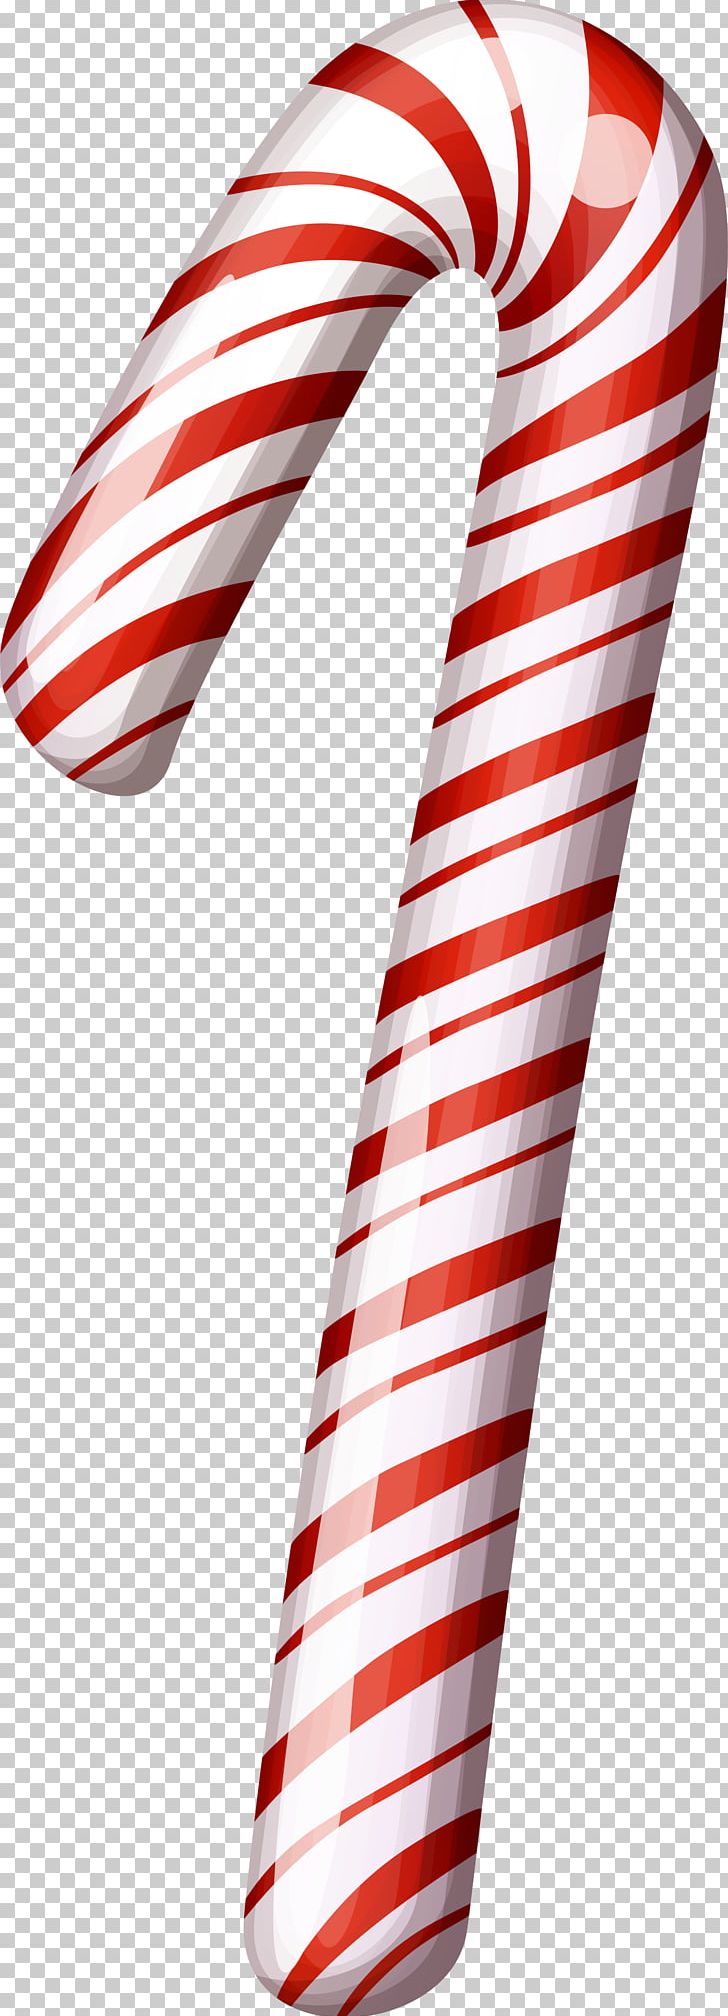 Candy Cane Polkagris Animation PNG, Clipart, Animation, Balloon Cartoon, Biscuit, Boy Cartoon, Candy Free PNG Download